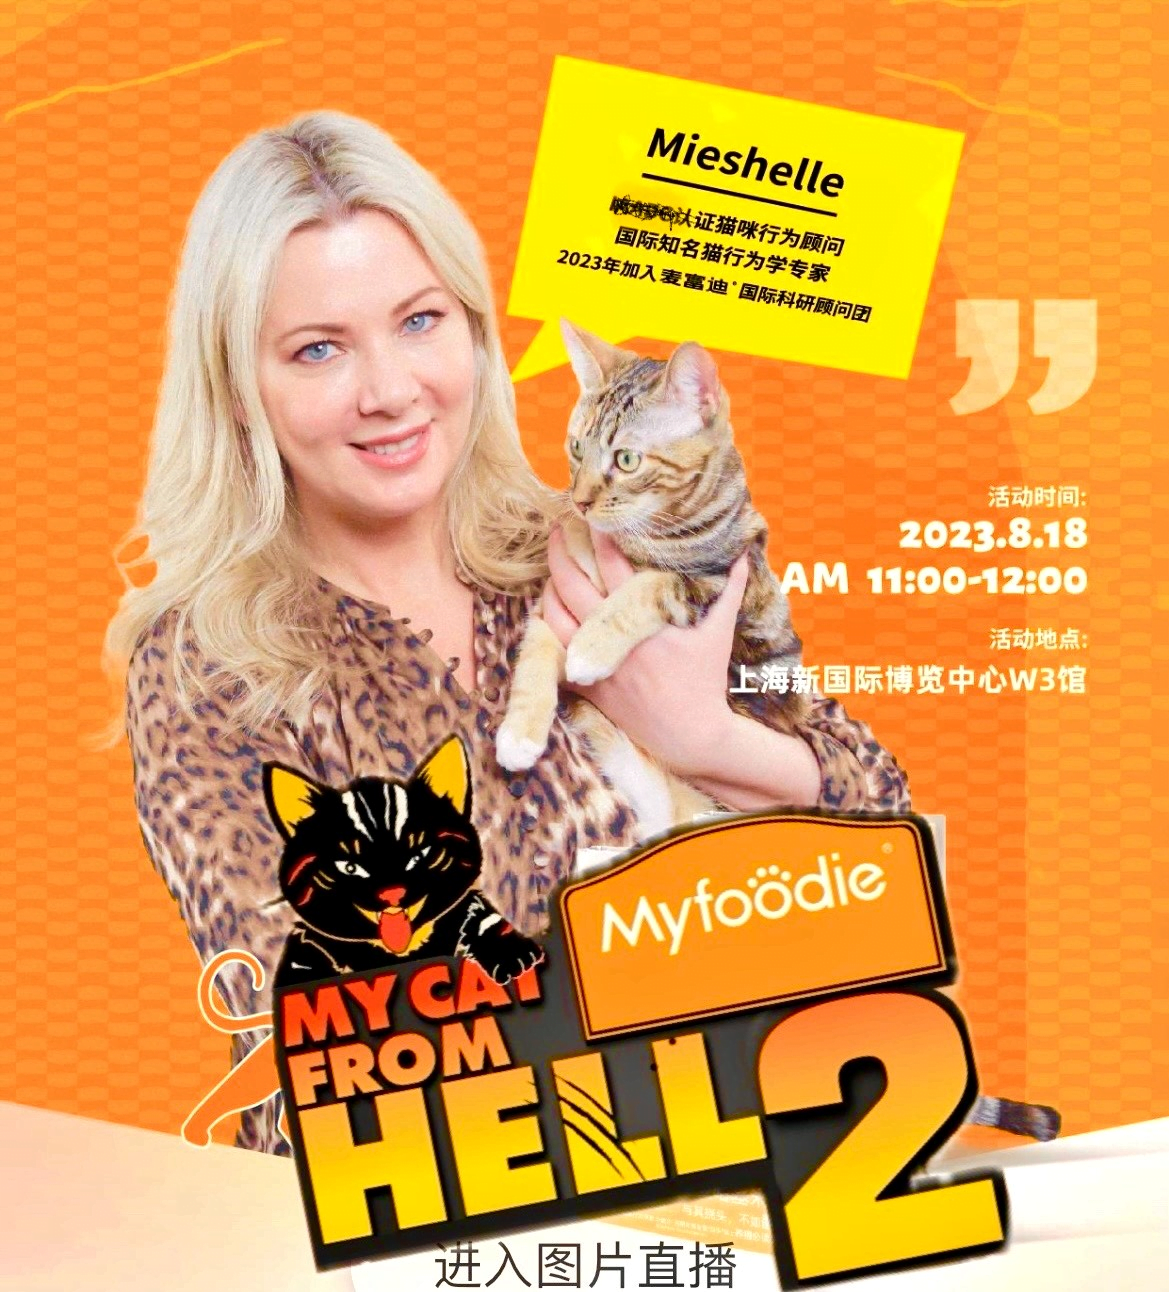 Mieshelle standing with cat for My Cat from Hell 2 TV Show advertisement | Mieshelle Nagelschneider | Cat Behaviorist | thecatbehaviorclinic.com